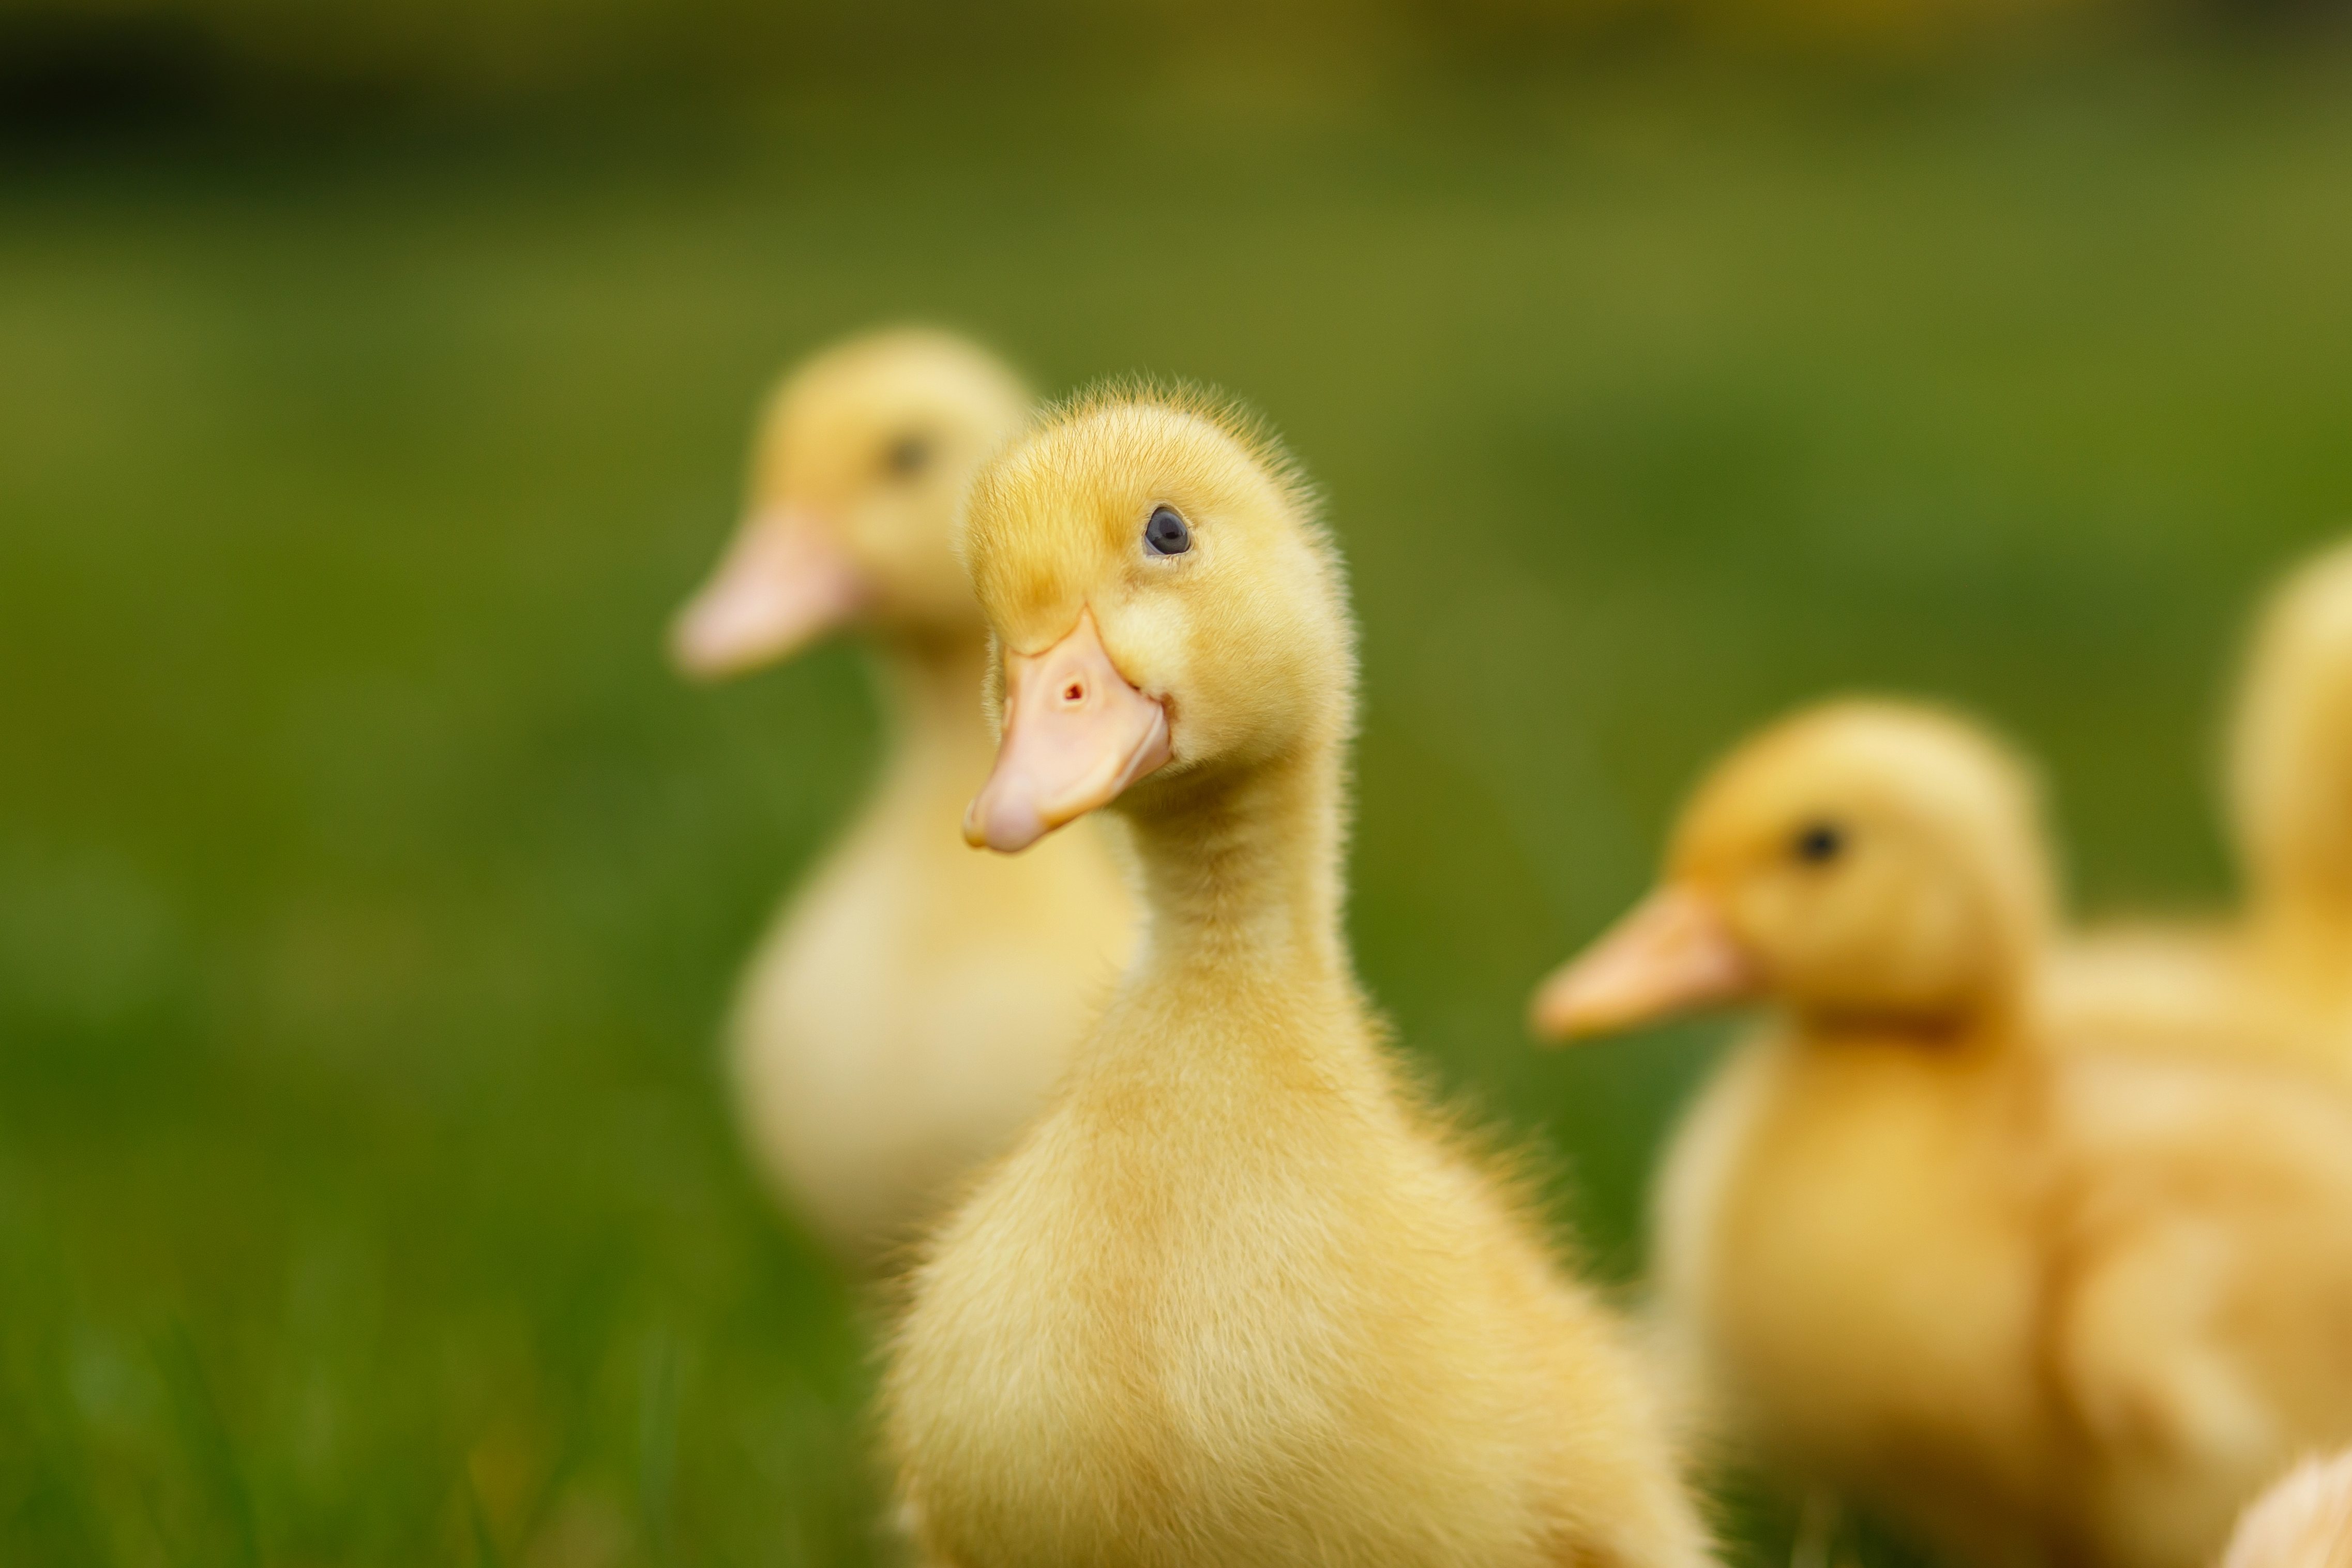 Ducks can suffer from various diseases that need to be stopped.